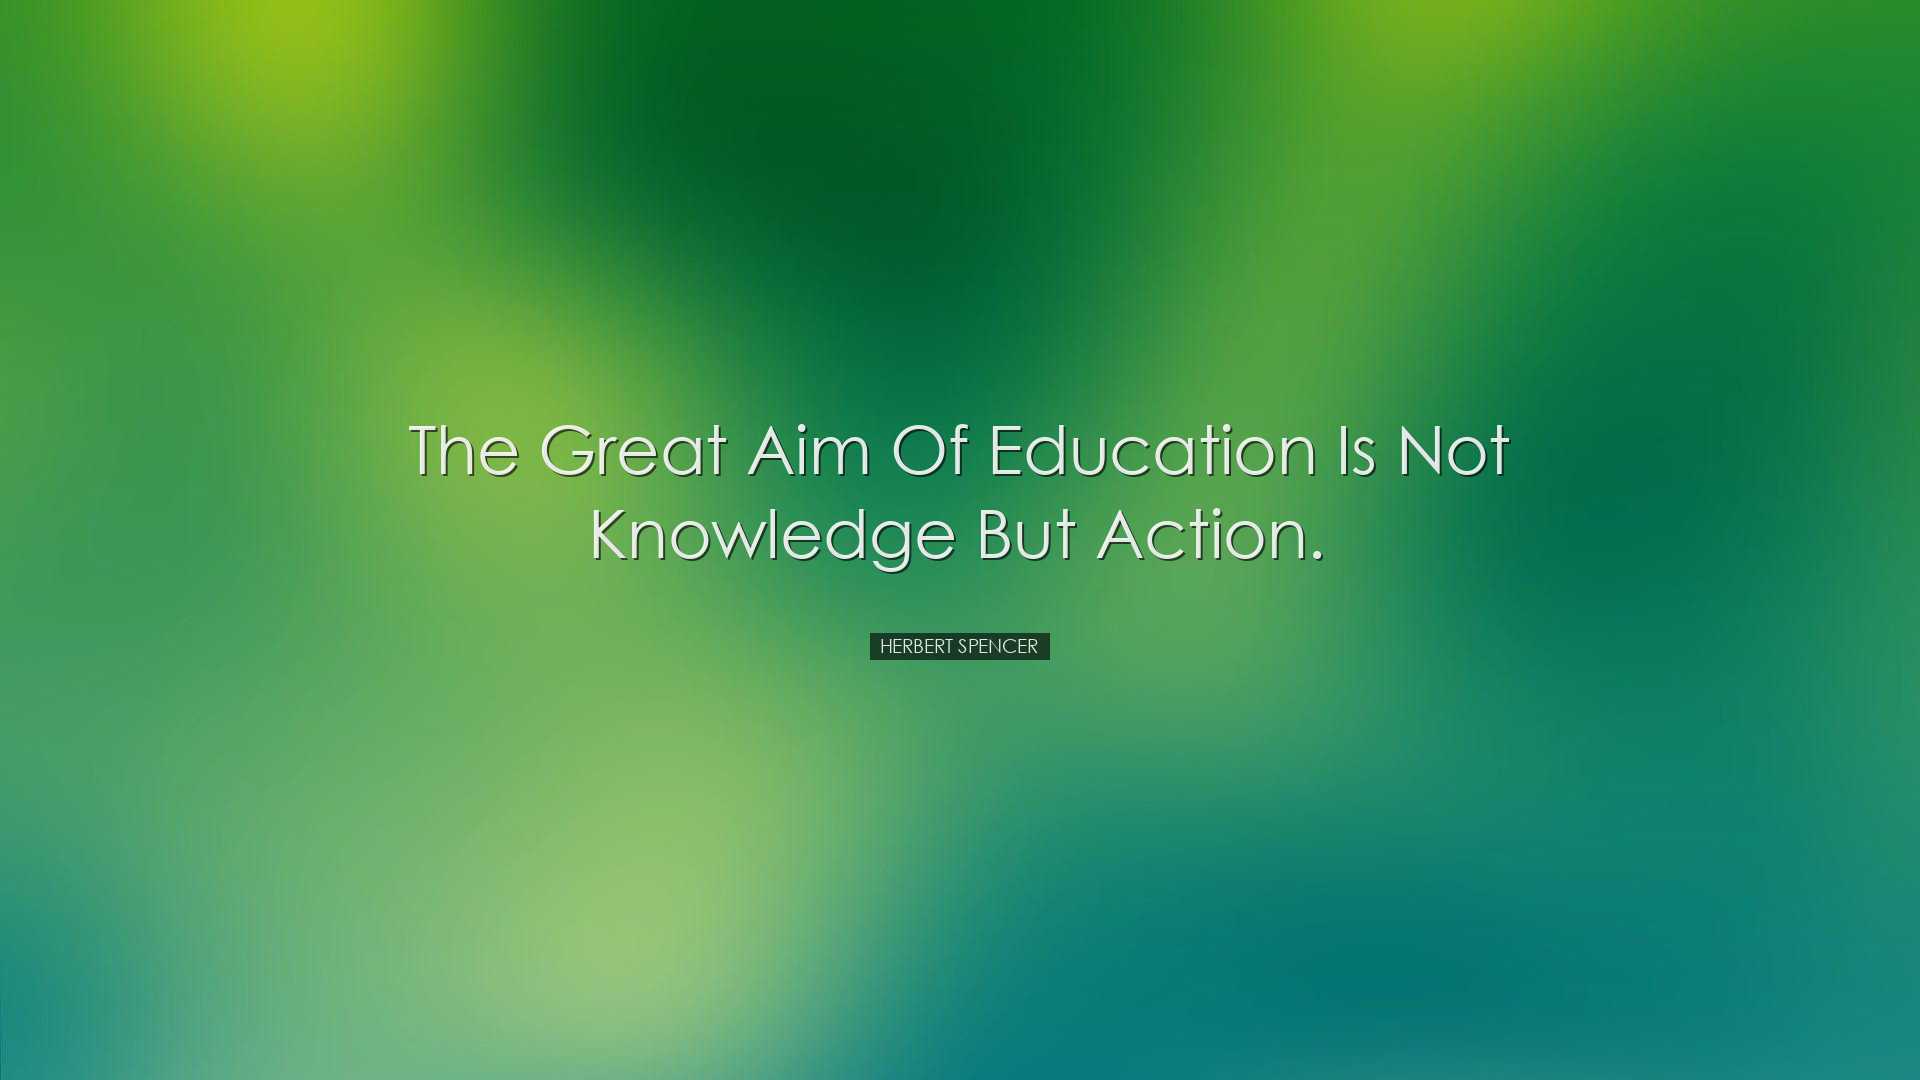 The great aim of education is not knowledge but action. - Herbert